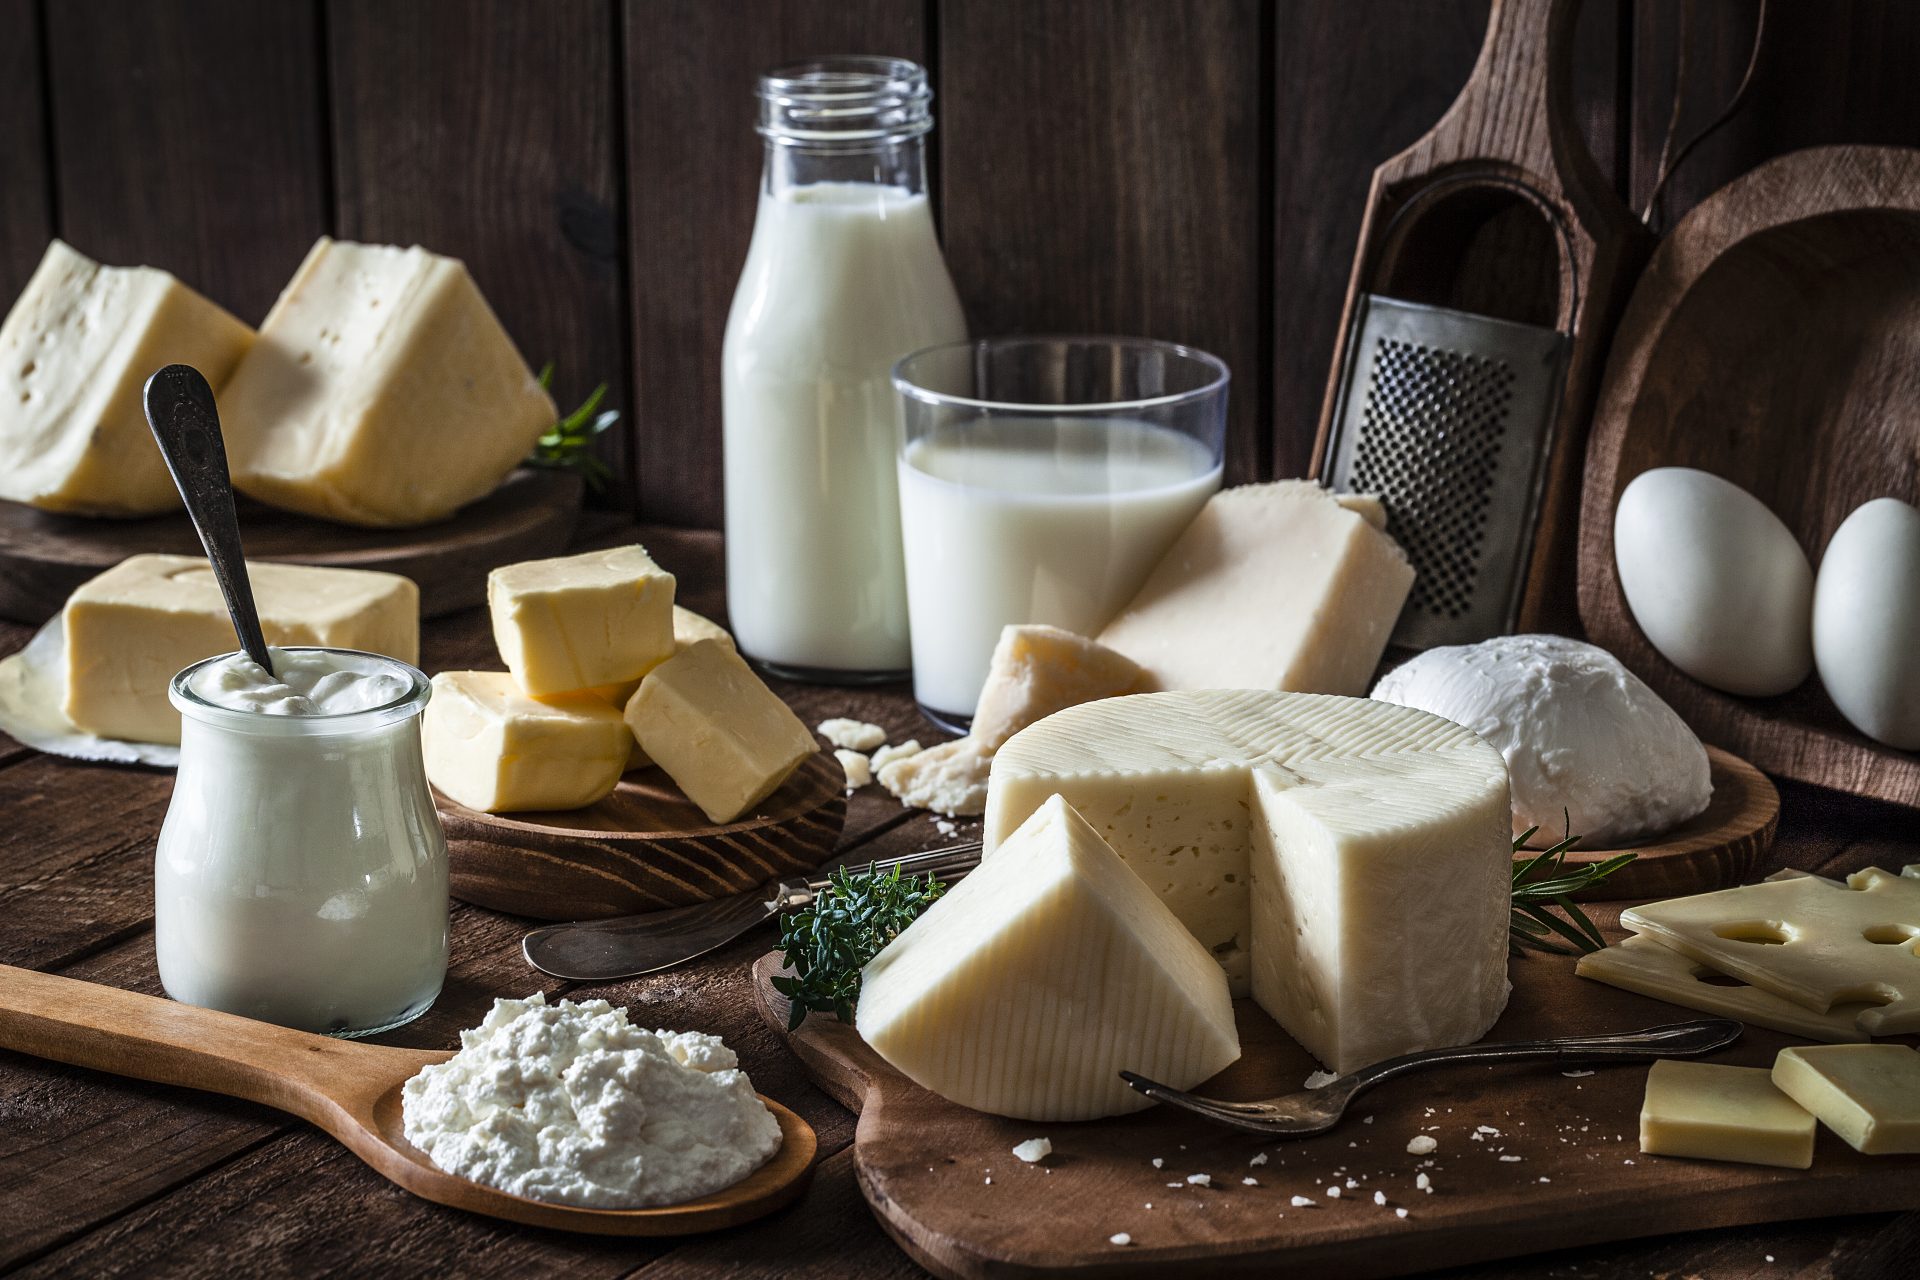 <p>A study that followed more than 4,500 people for a decade found that fermented dairy products like cheese, kefir or yogurt were inversely associated with overall mortality. In other words, people who consumed them more died less (during the study period).</p>